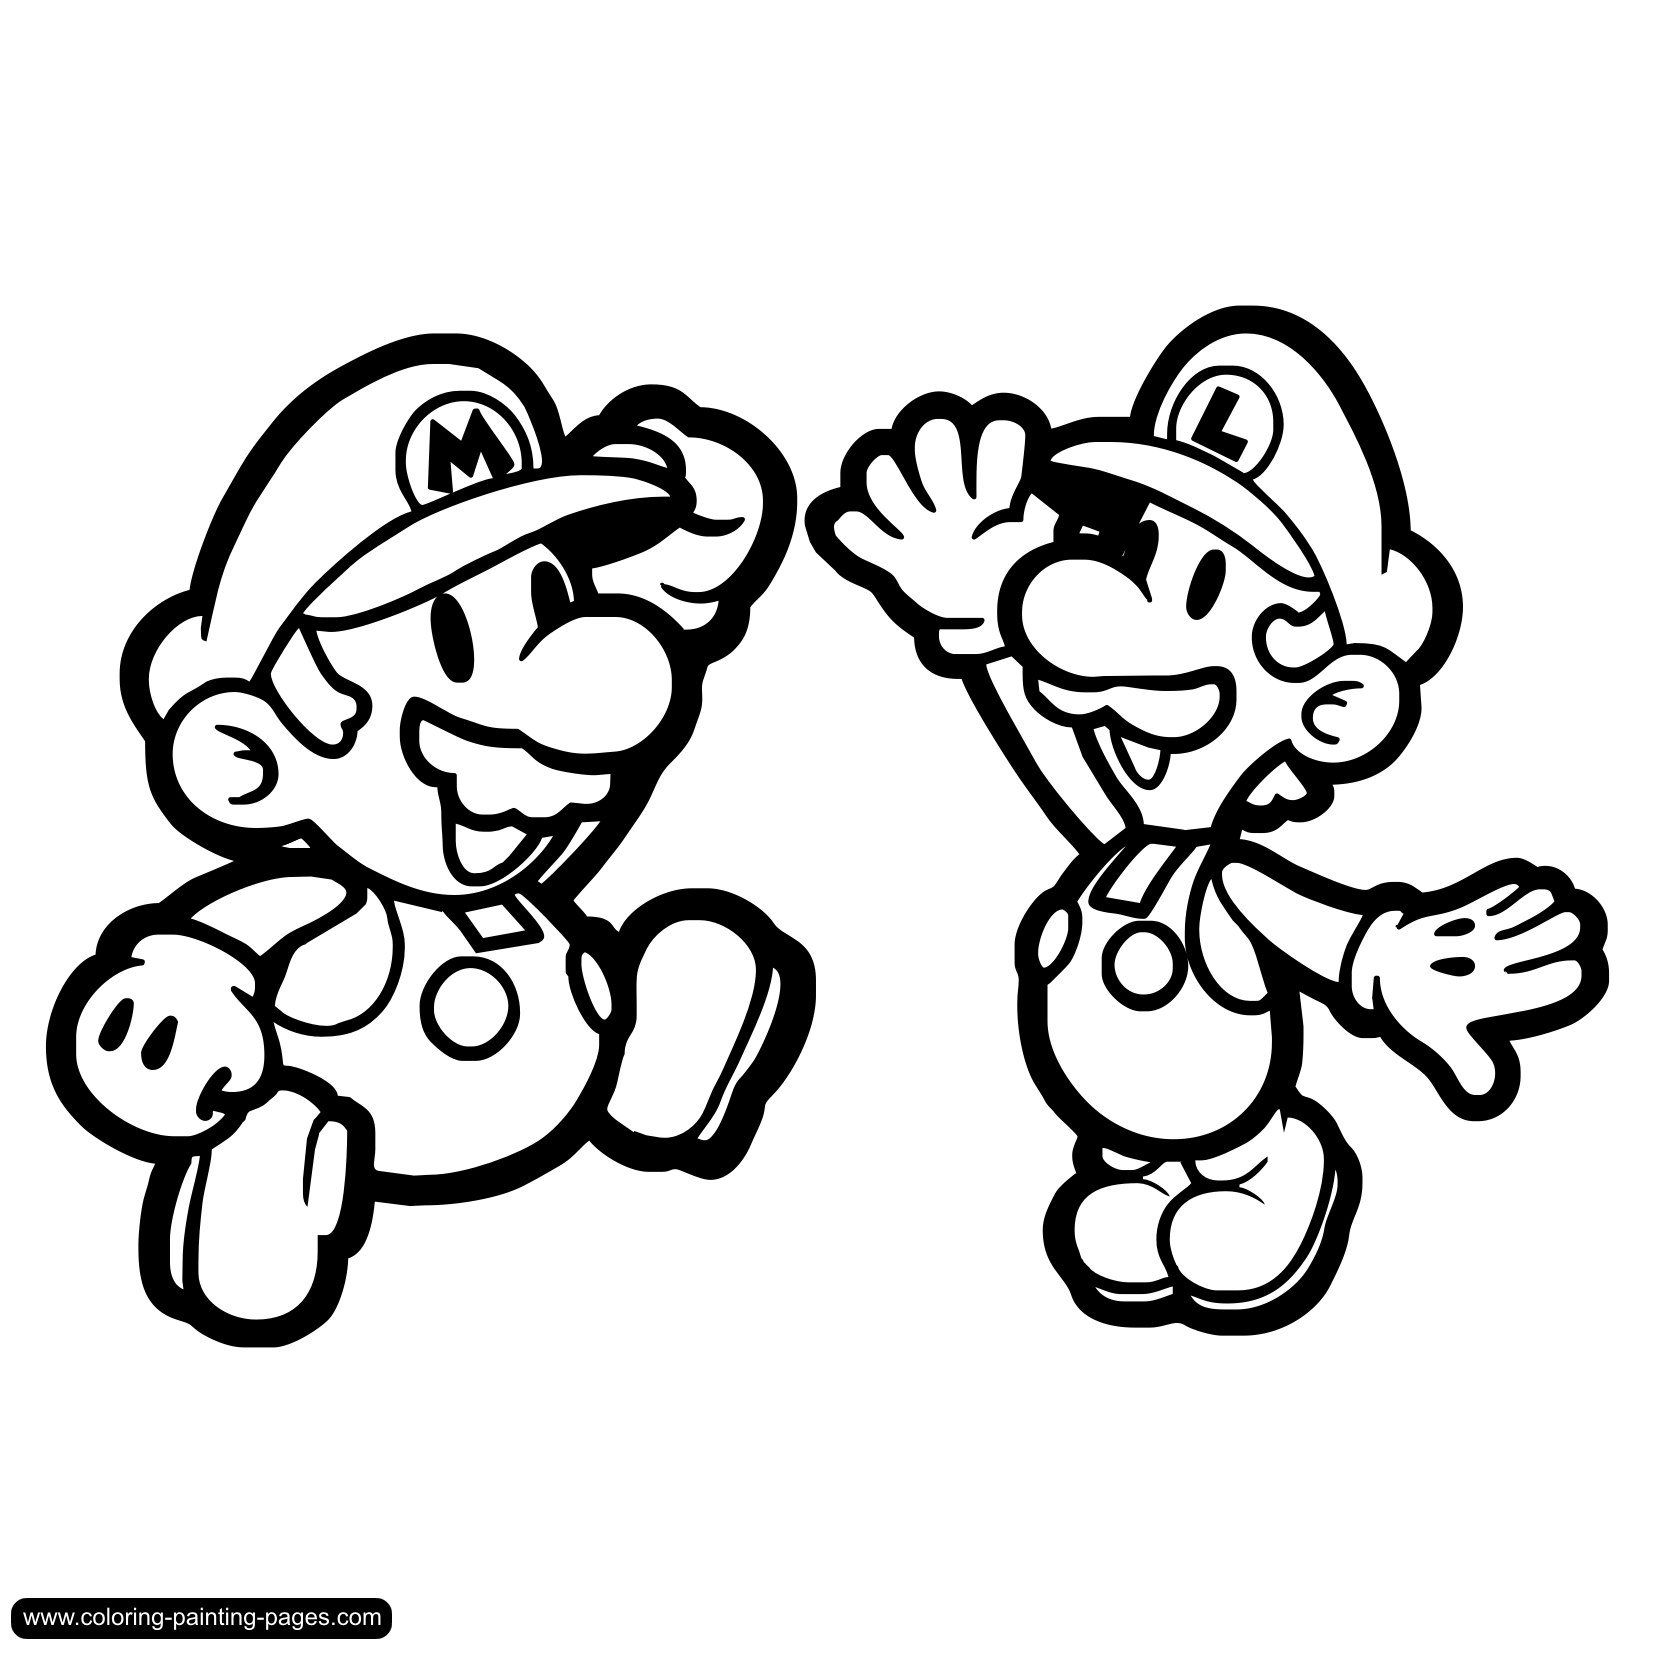 Mario Bros Coloring Page | Coloring Pages for Kids and for Adults